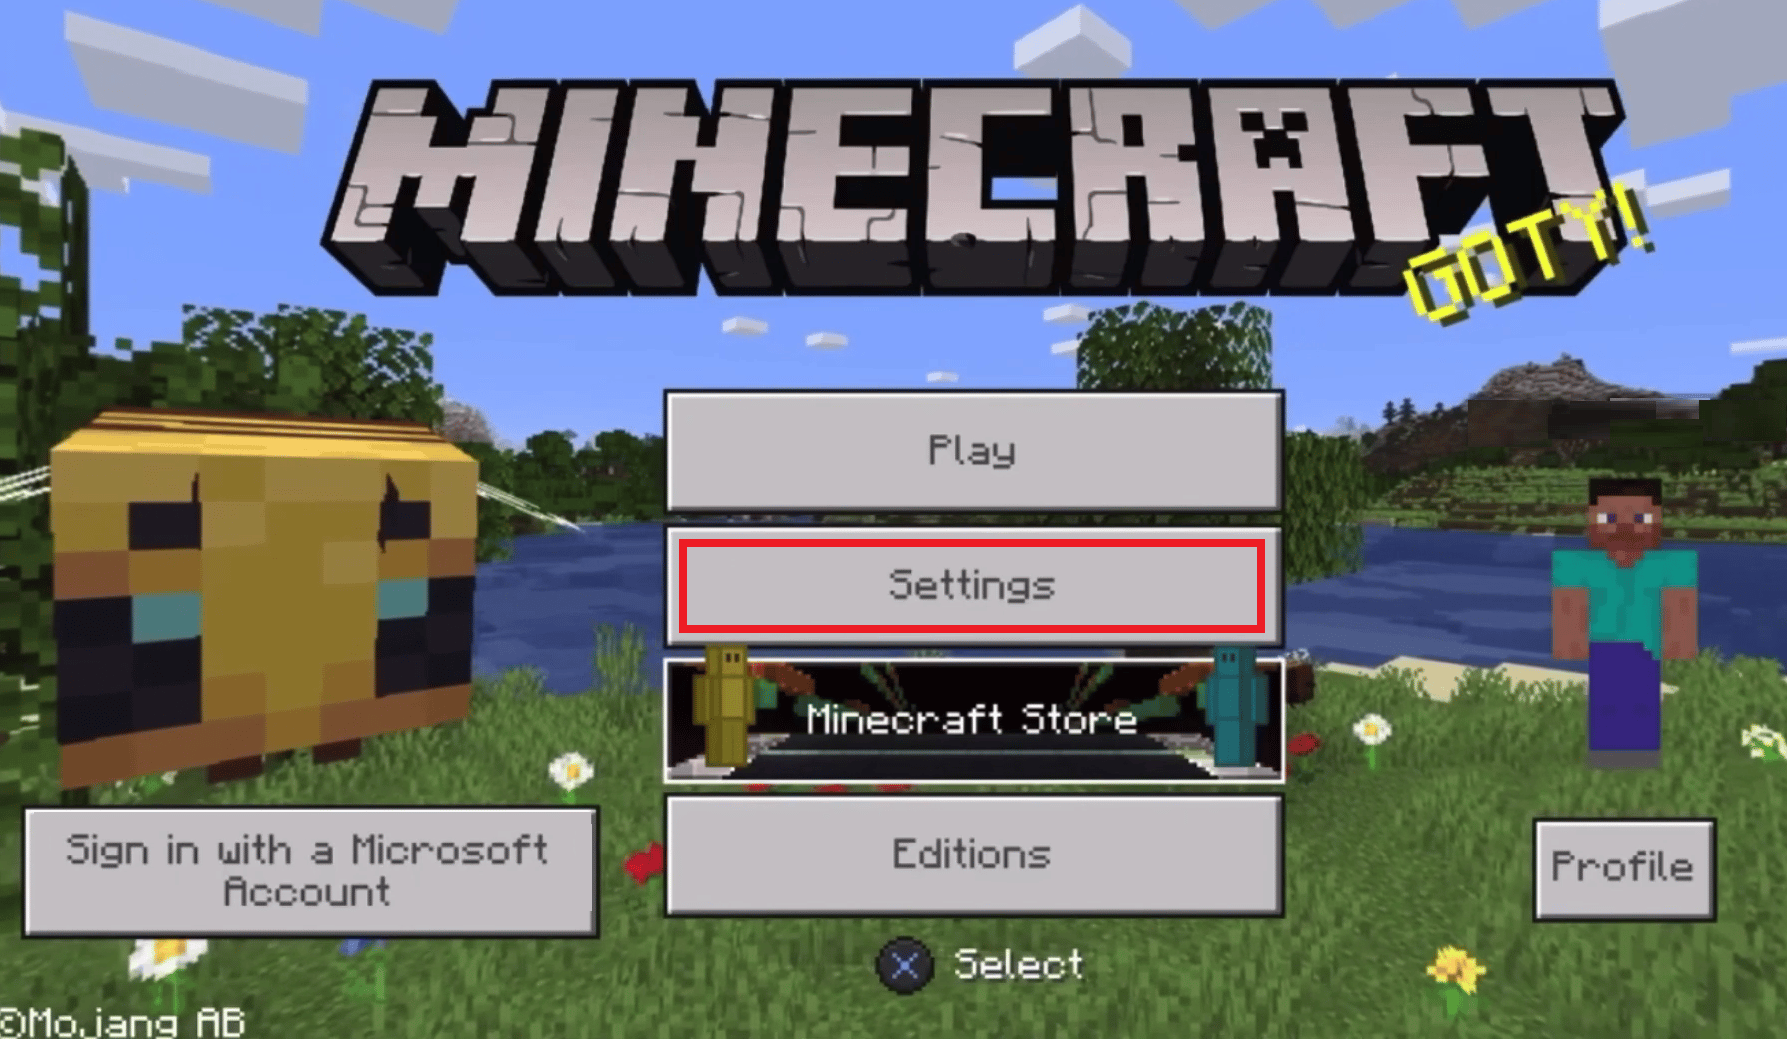 From the Minecraft Game Home Screen on PS4, select Settings | 